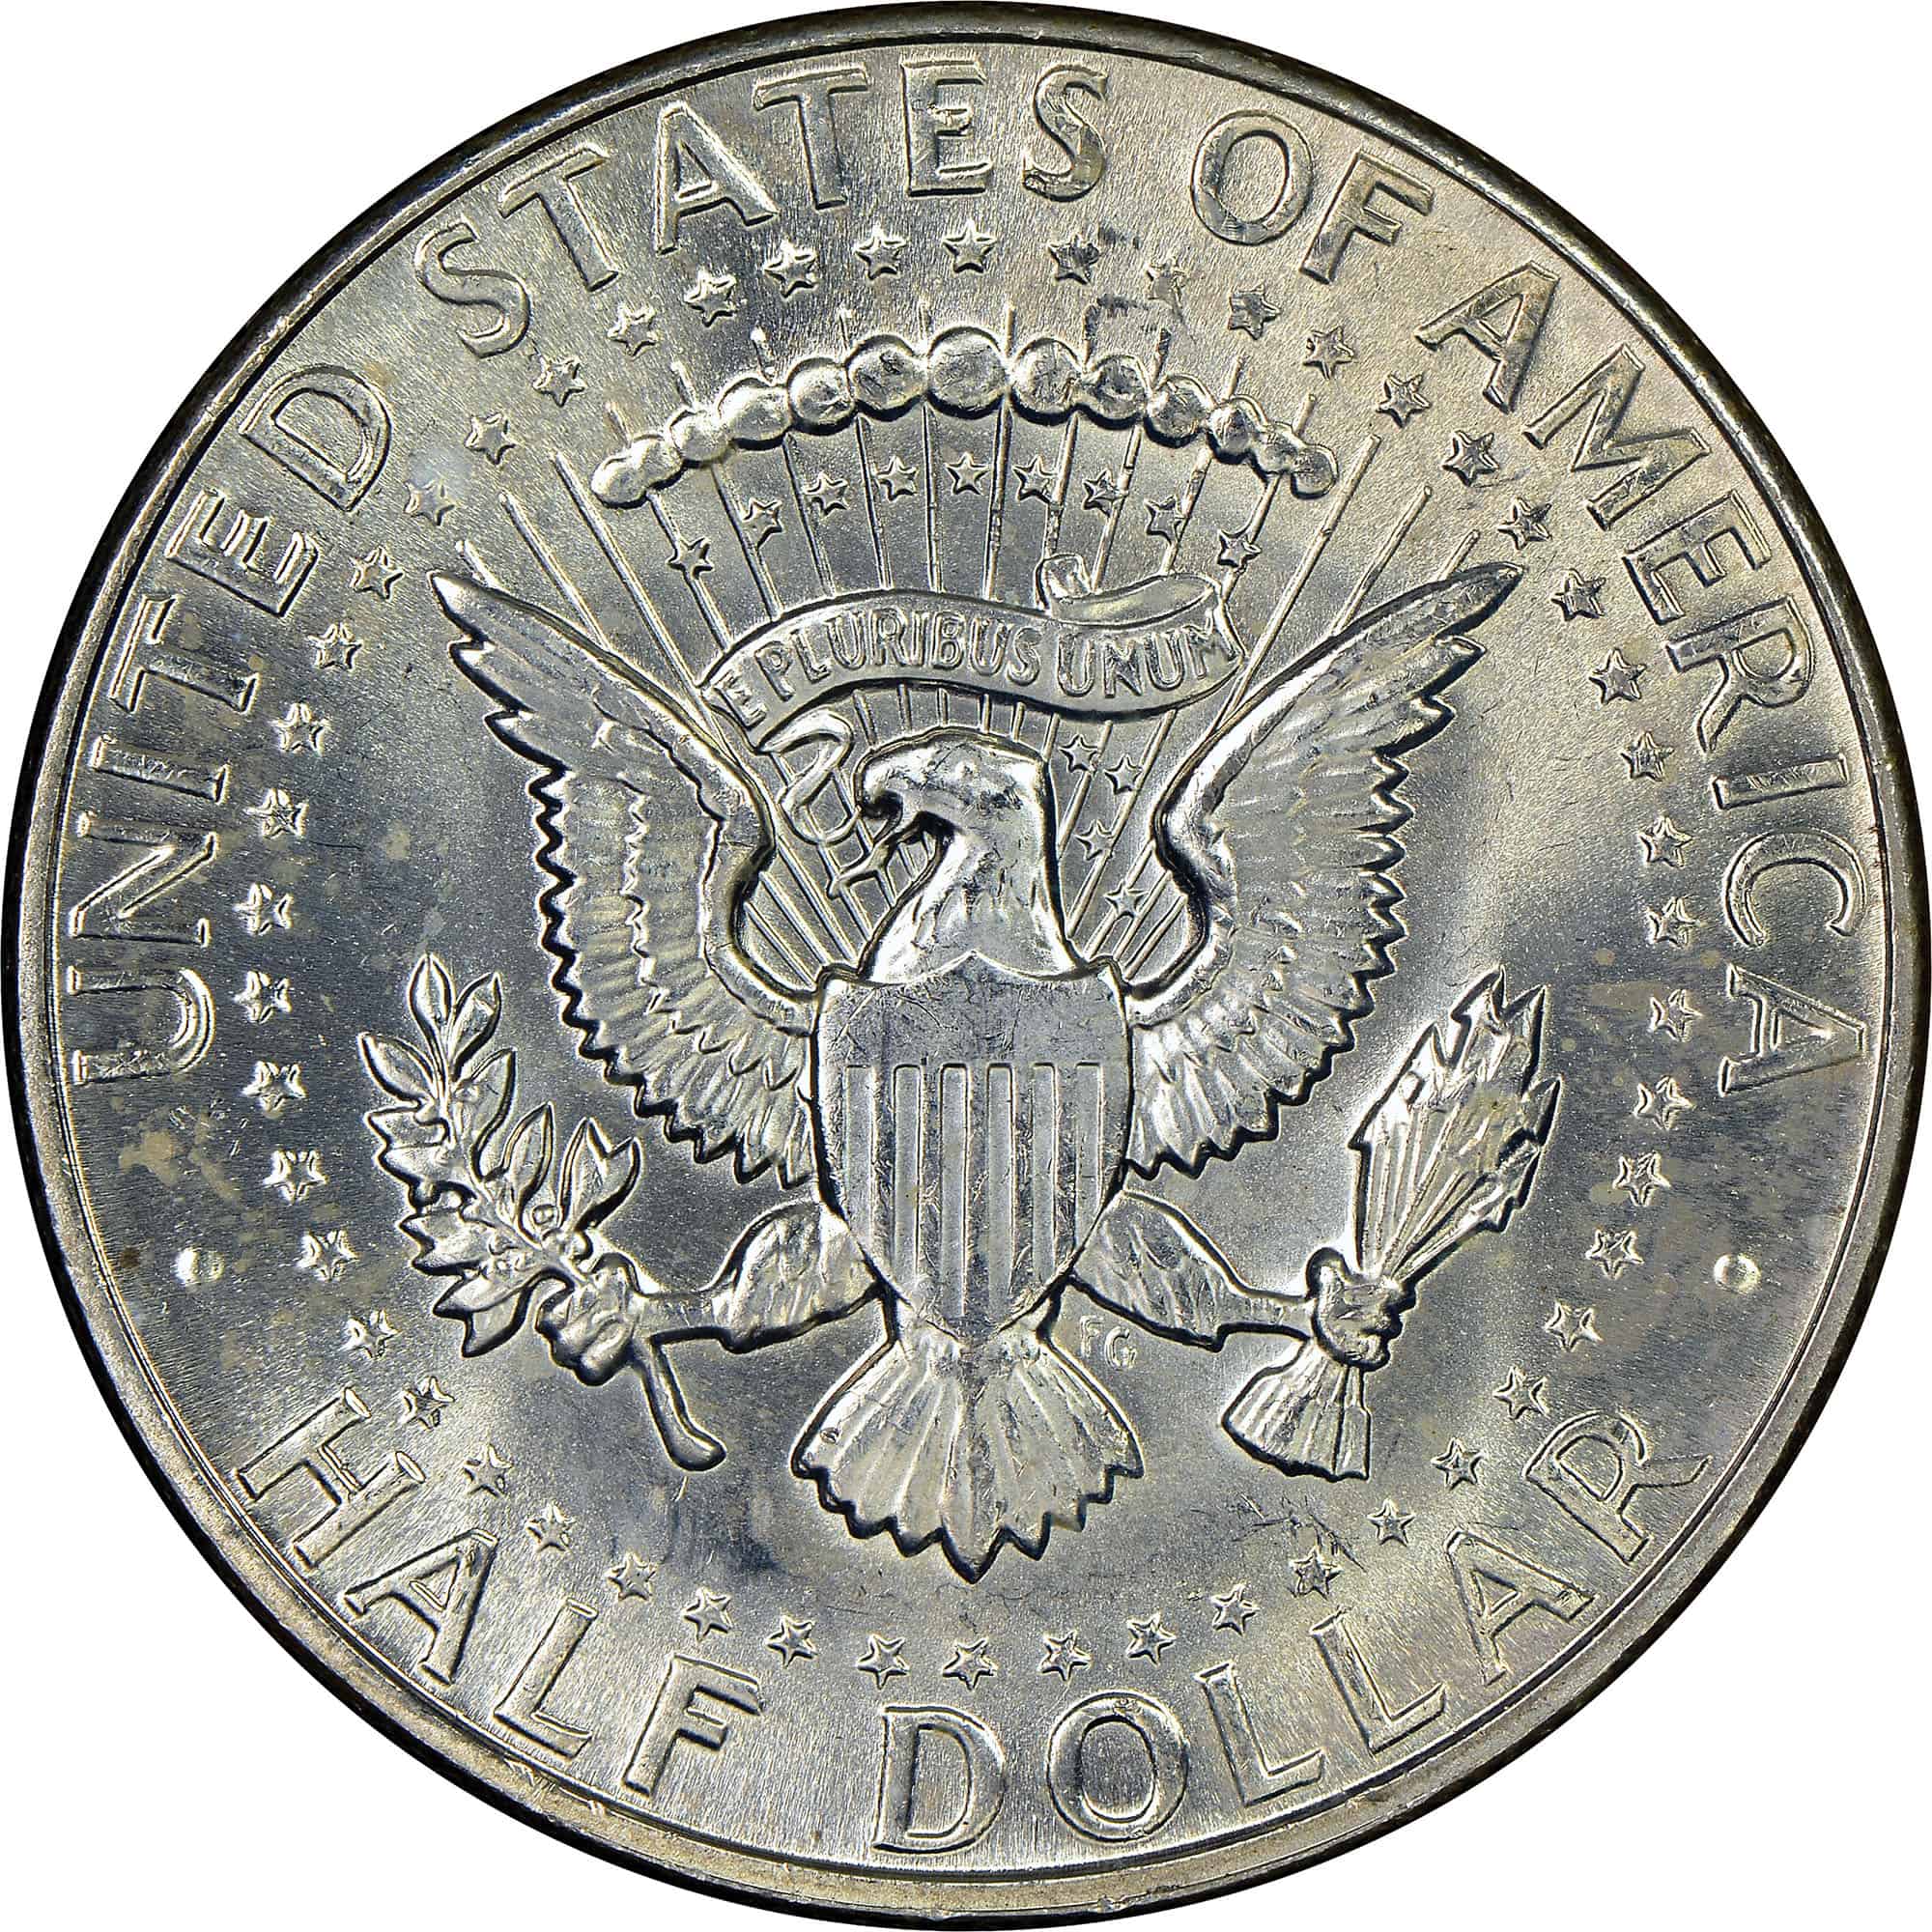 The reverse of the 1968 Kennedy half-dollar